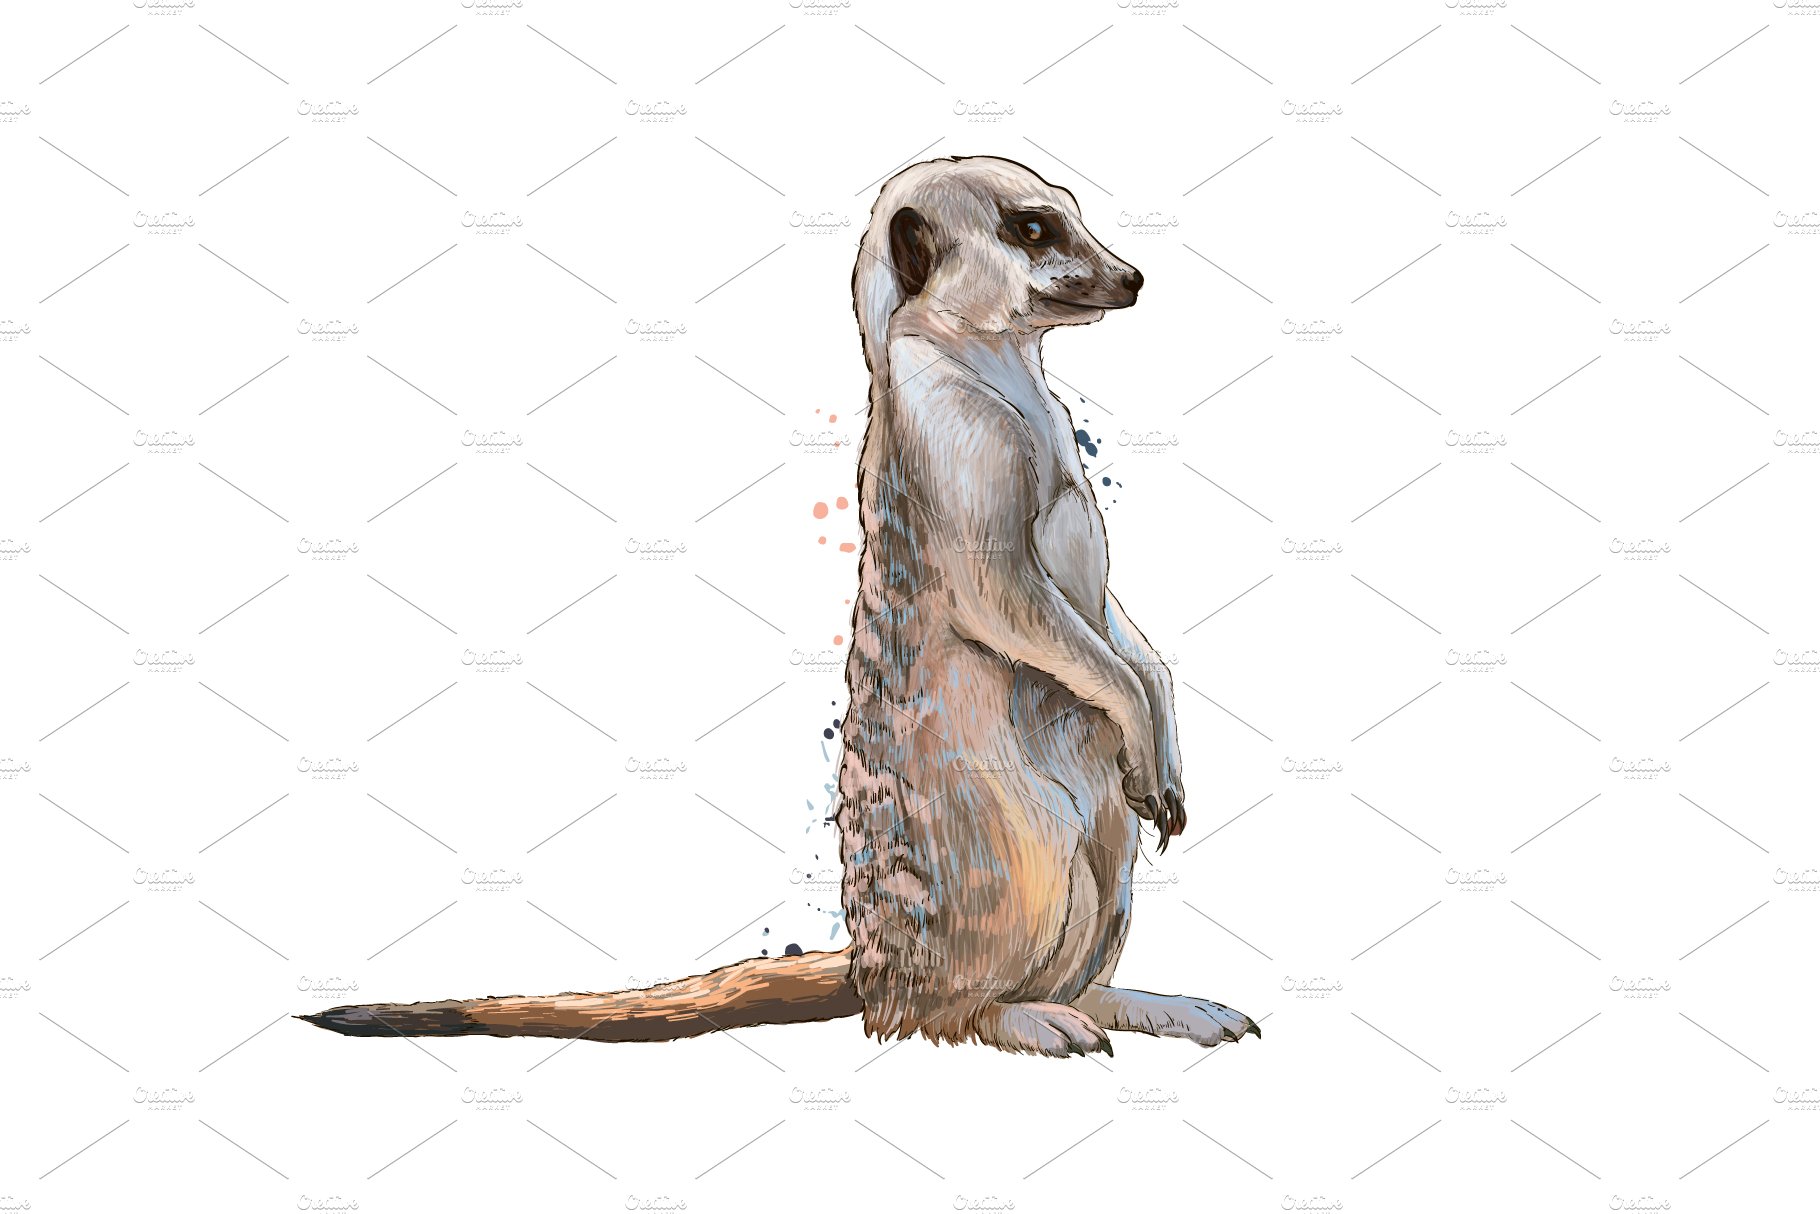 Meerkat from a splash cover image.